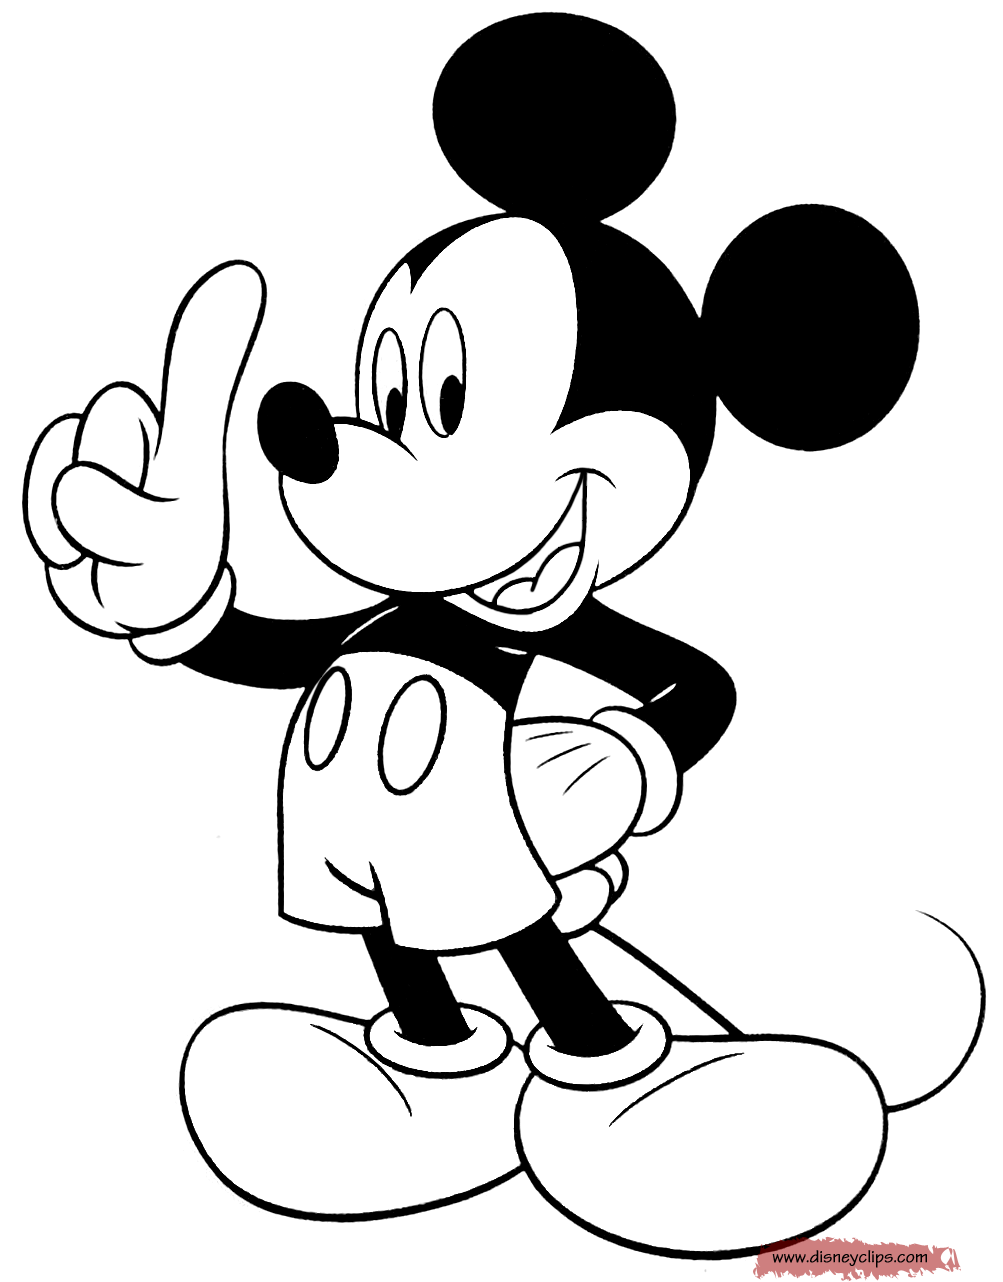 printable coloring sheets mickey mouse mickey mouse coloring pages getcoloringpagescom mouse sheets coloring printable mickey 